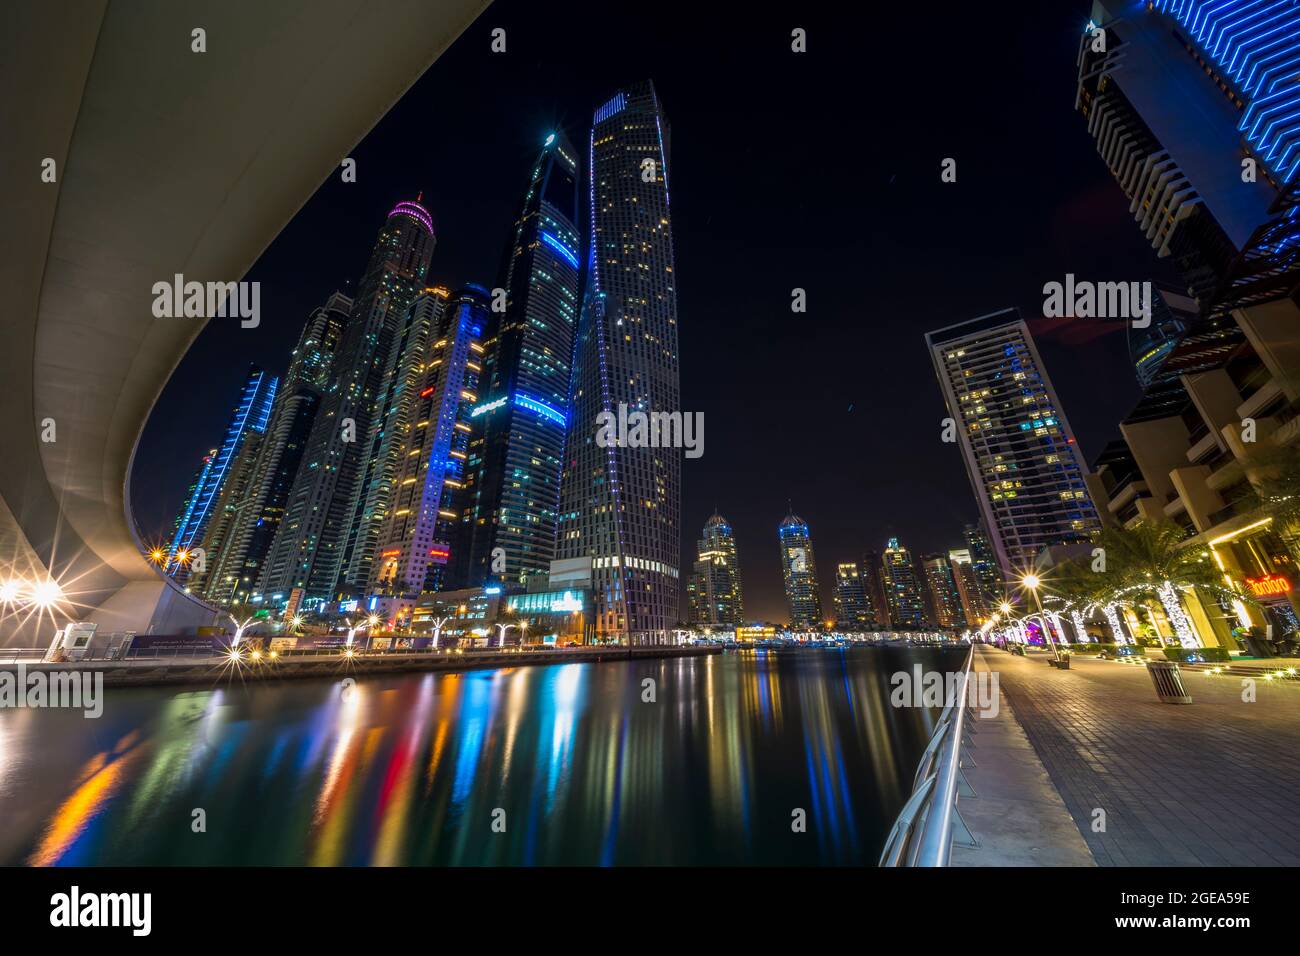 Colourful pillars of radiant light stream across the still waters of the Dubai Marina beneath some of the world's tallest residential buildings. Stock Photo